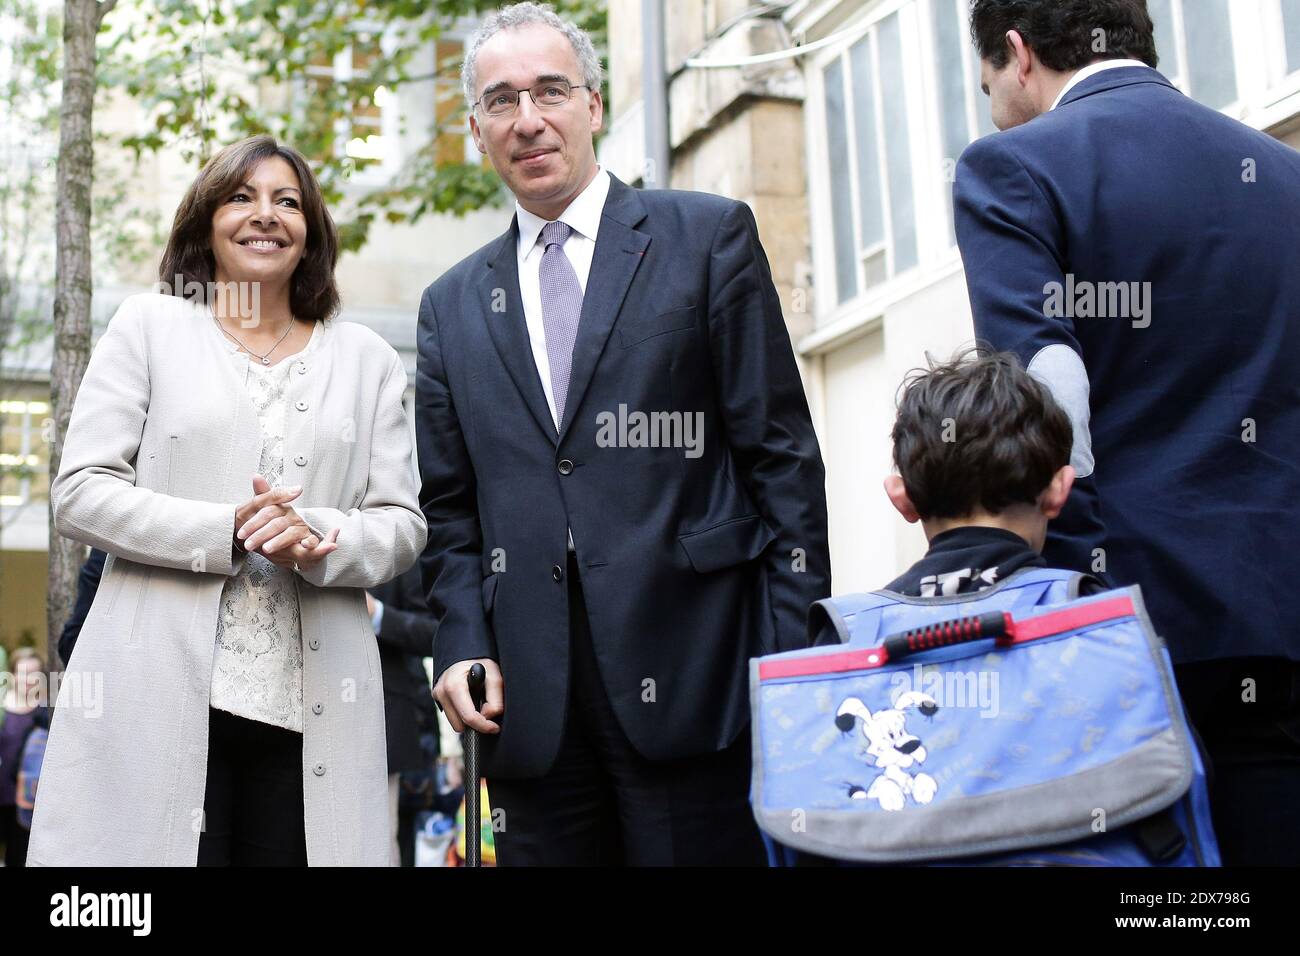 Paris Mayor Anne Hidalgo takes part to the start of the new school year (rentree scolaire) in the 4th district of Paris, France, on September 02, 2014. Photo by Stephane Lemouton/ABACAPRESS.COM Stock Photo